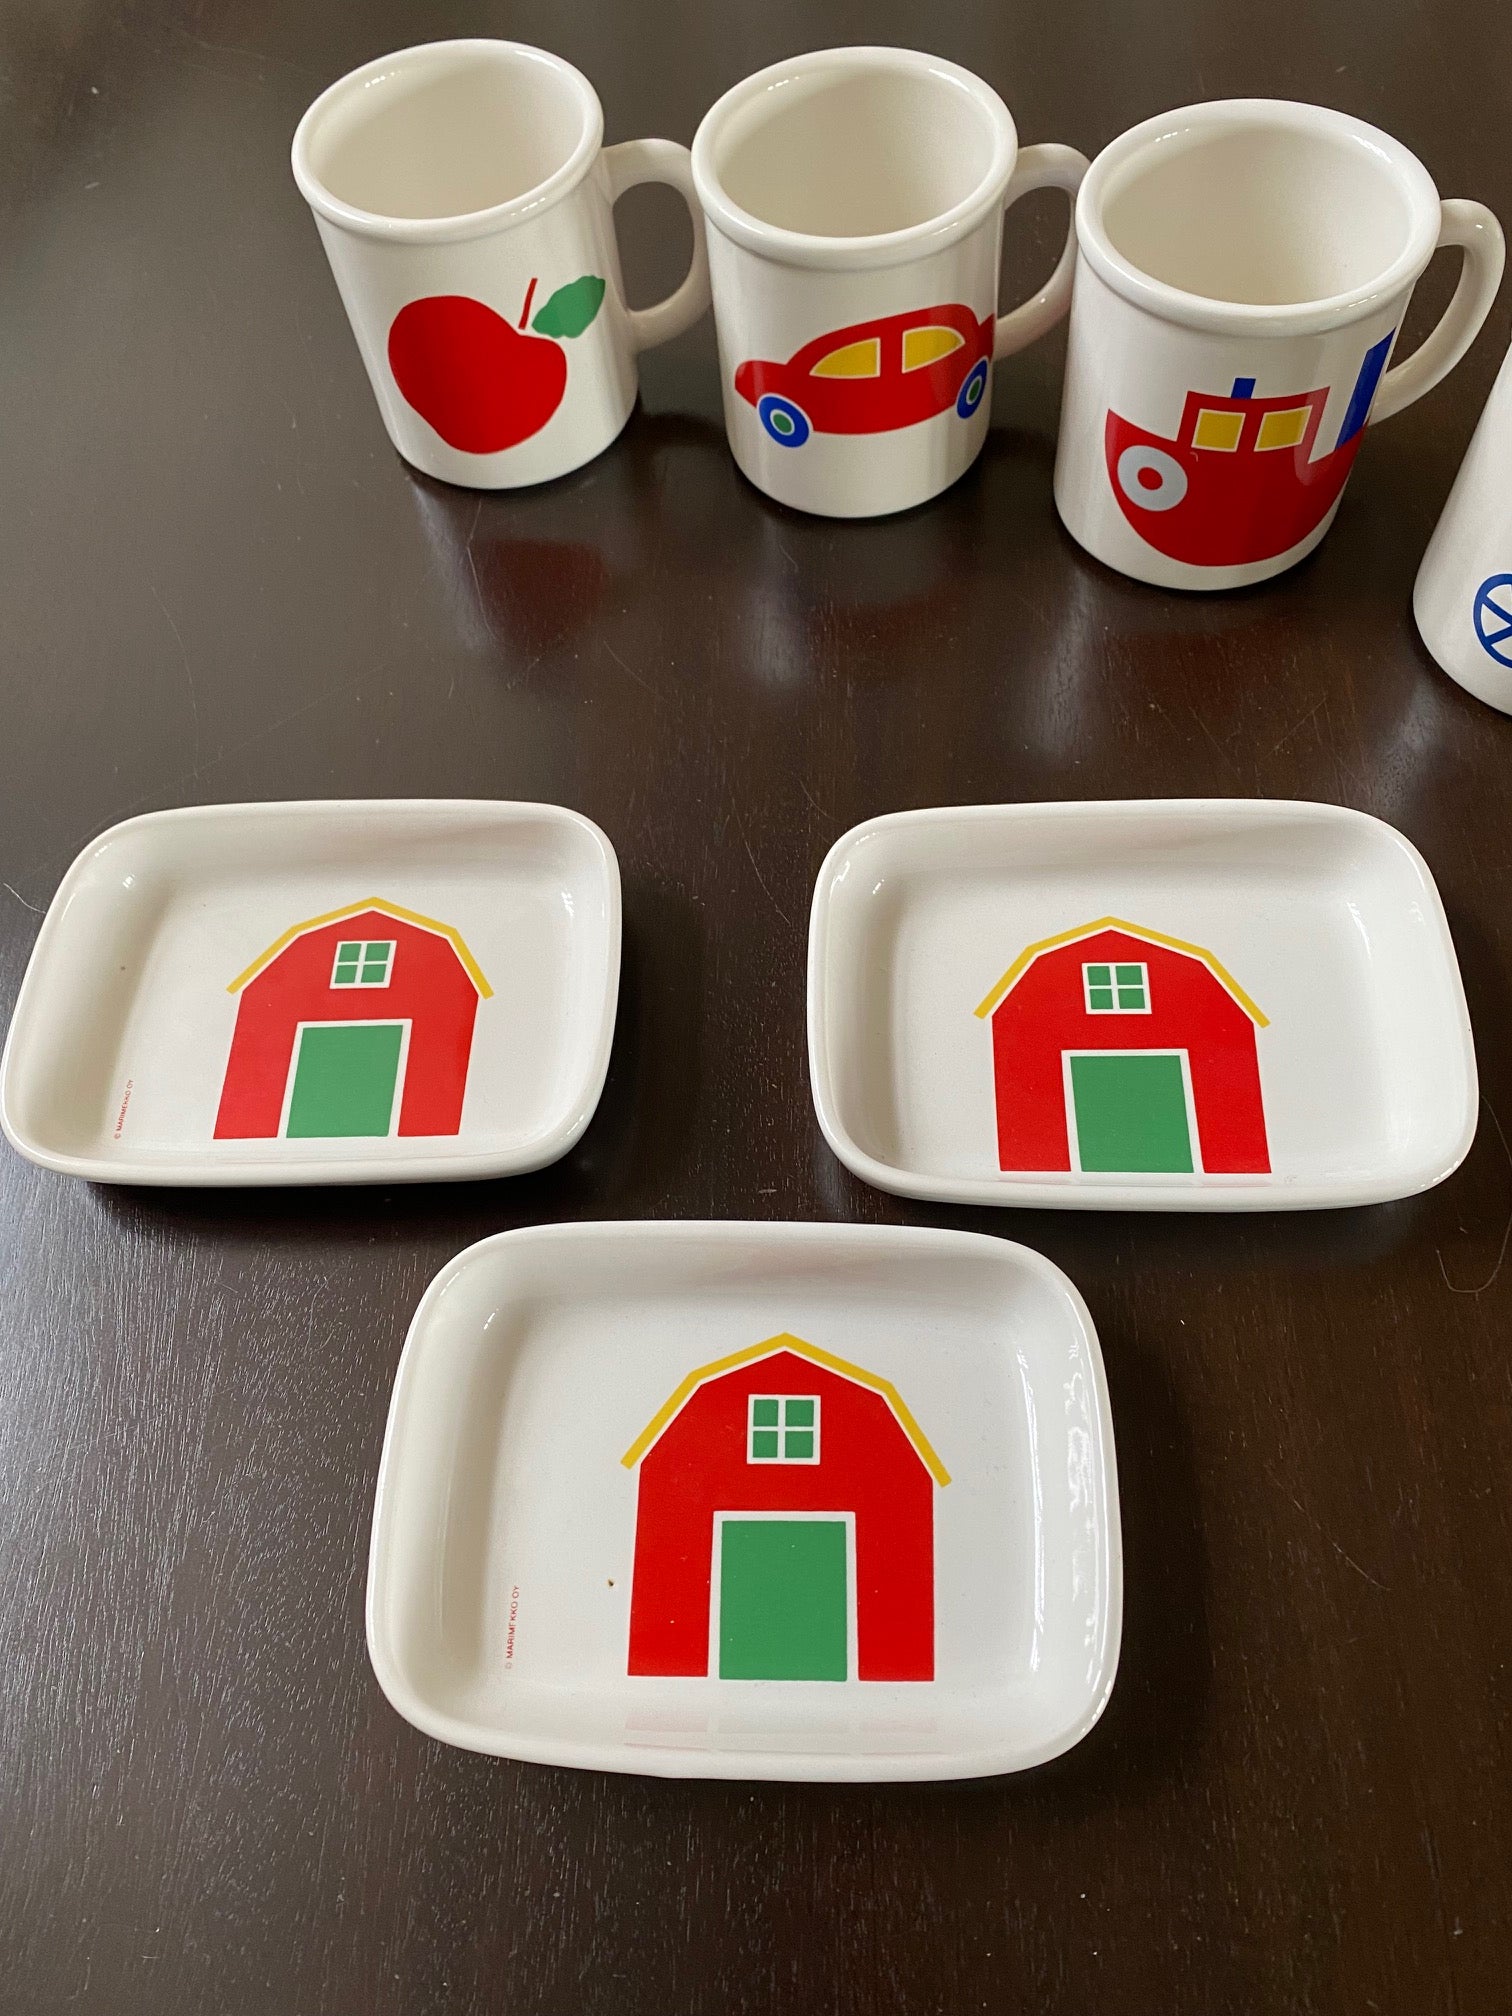 Pfaltzgraff Children's Snack Plates/Dishes by Marimekko for American Airlines with house motif shown with Marimekko mugs- Cook Street Vintage